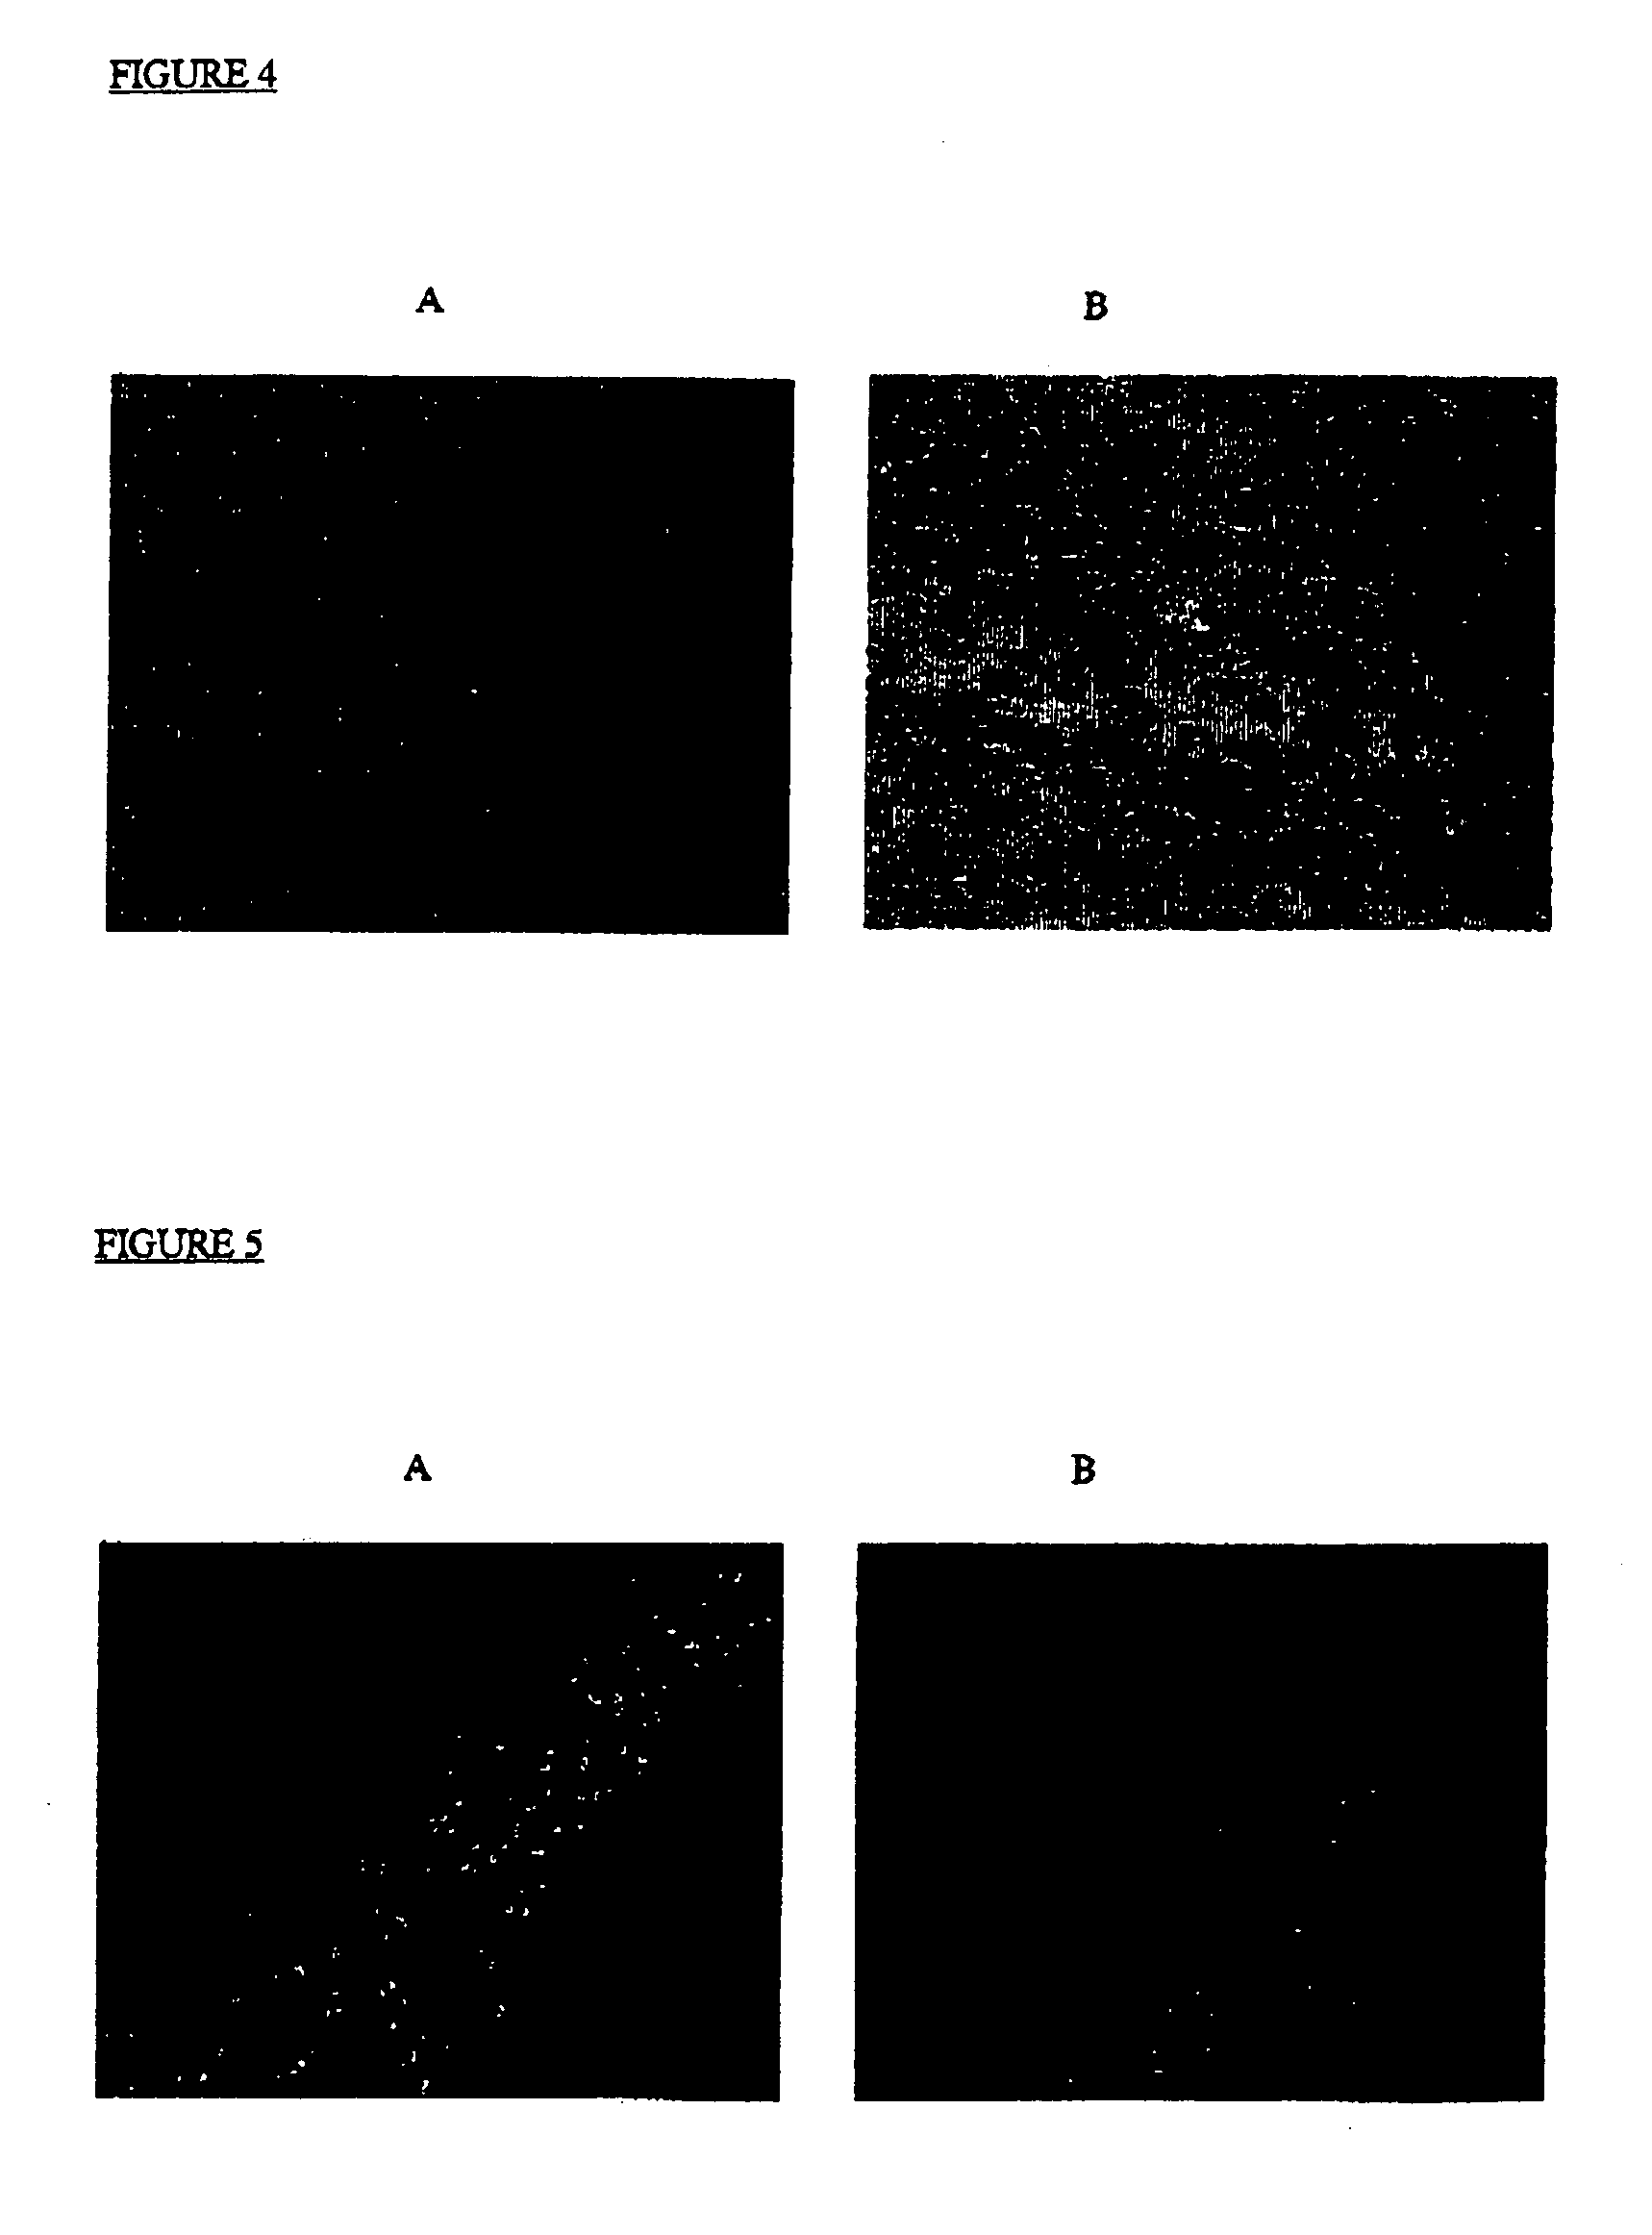 Therapeutic compositions and methods of treating glycolipid storage related disorders